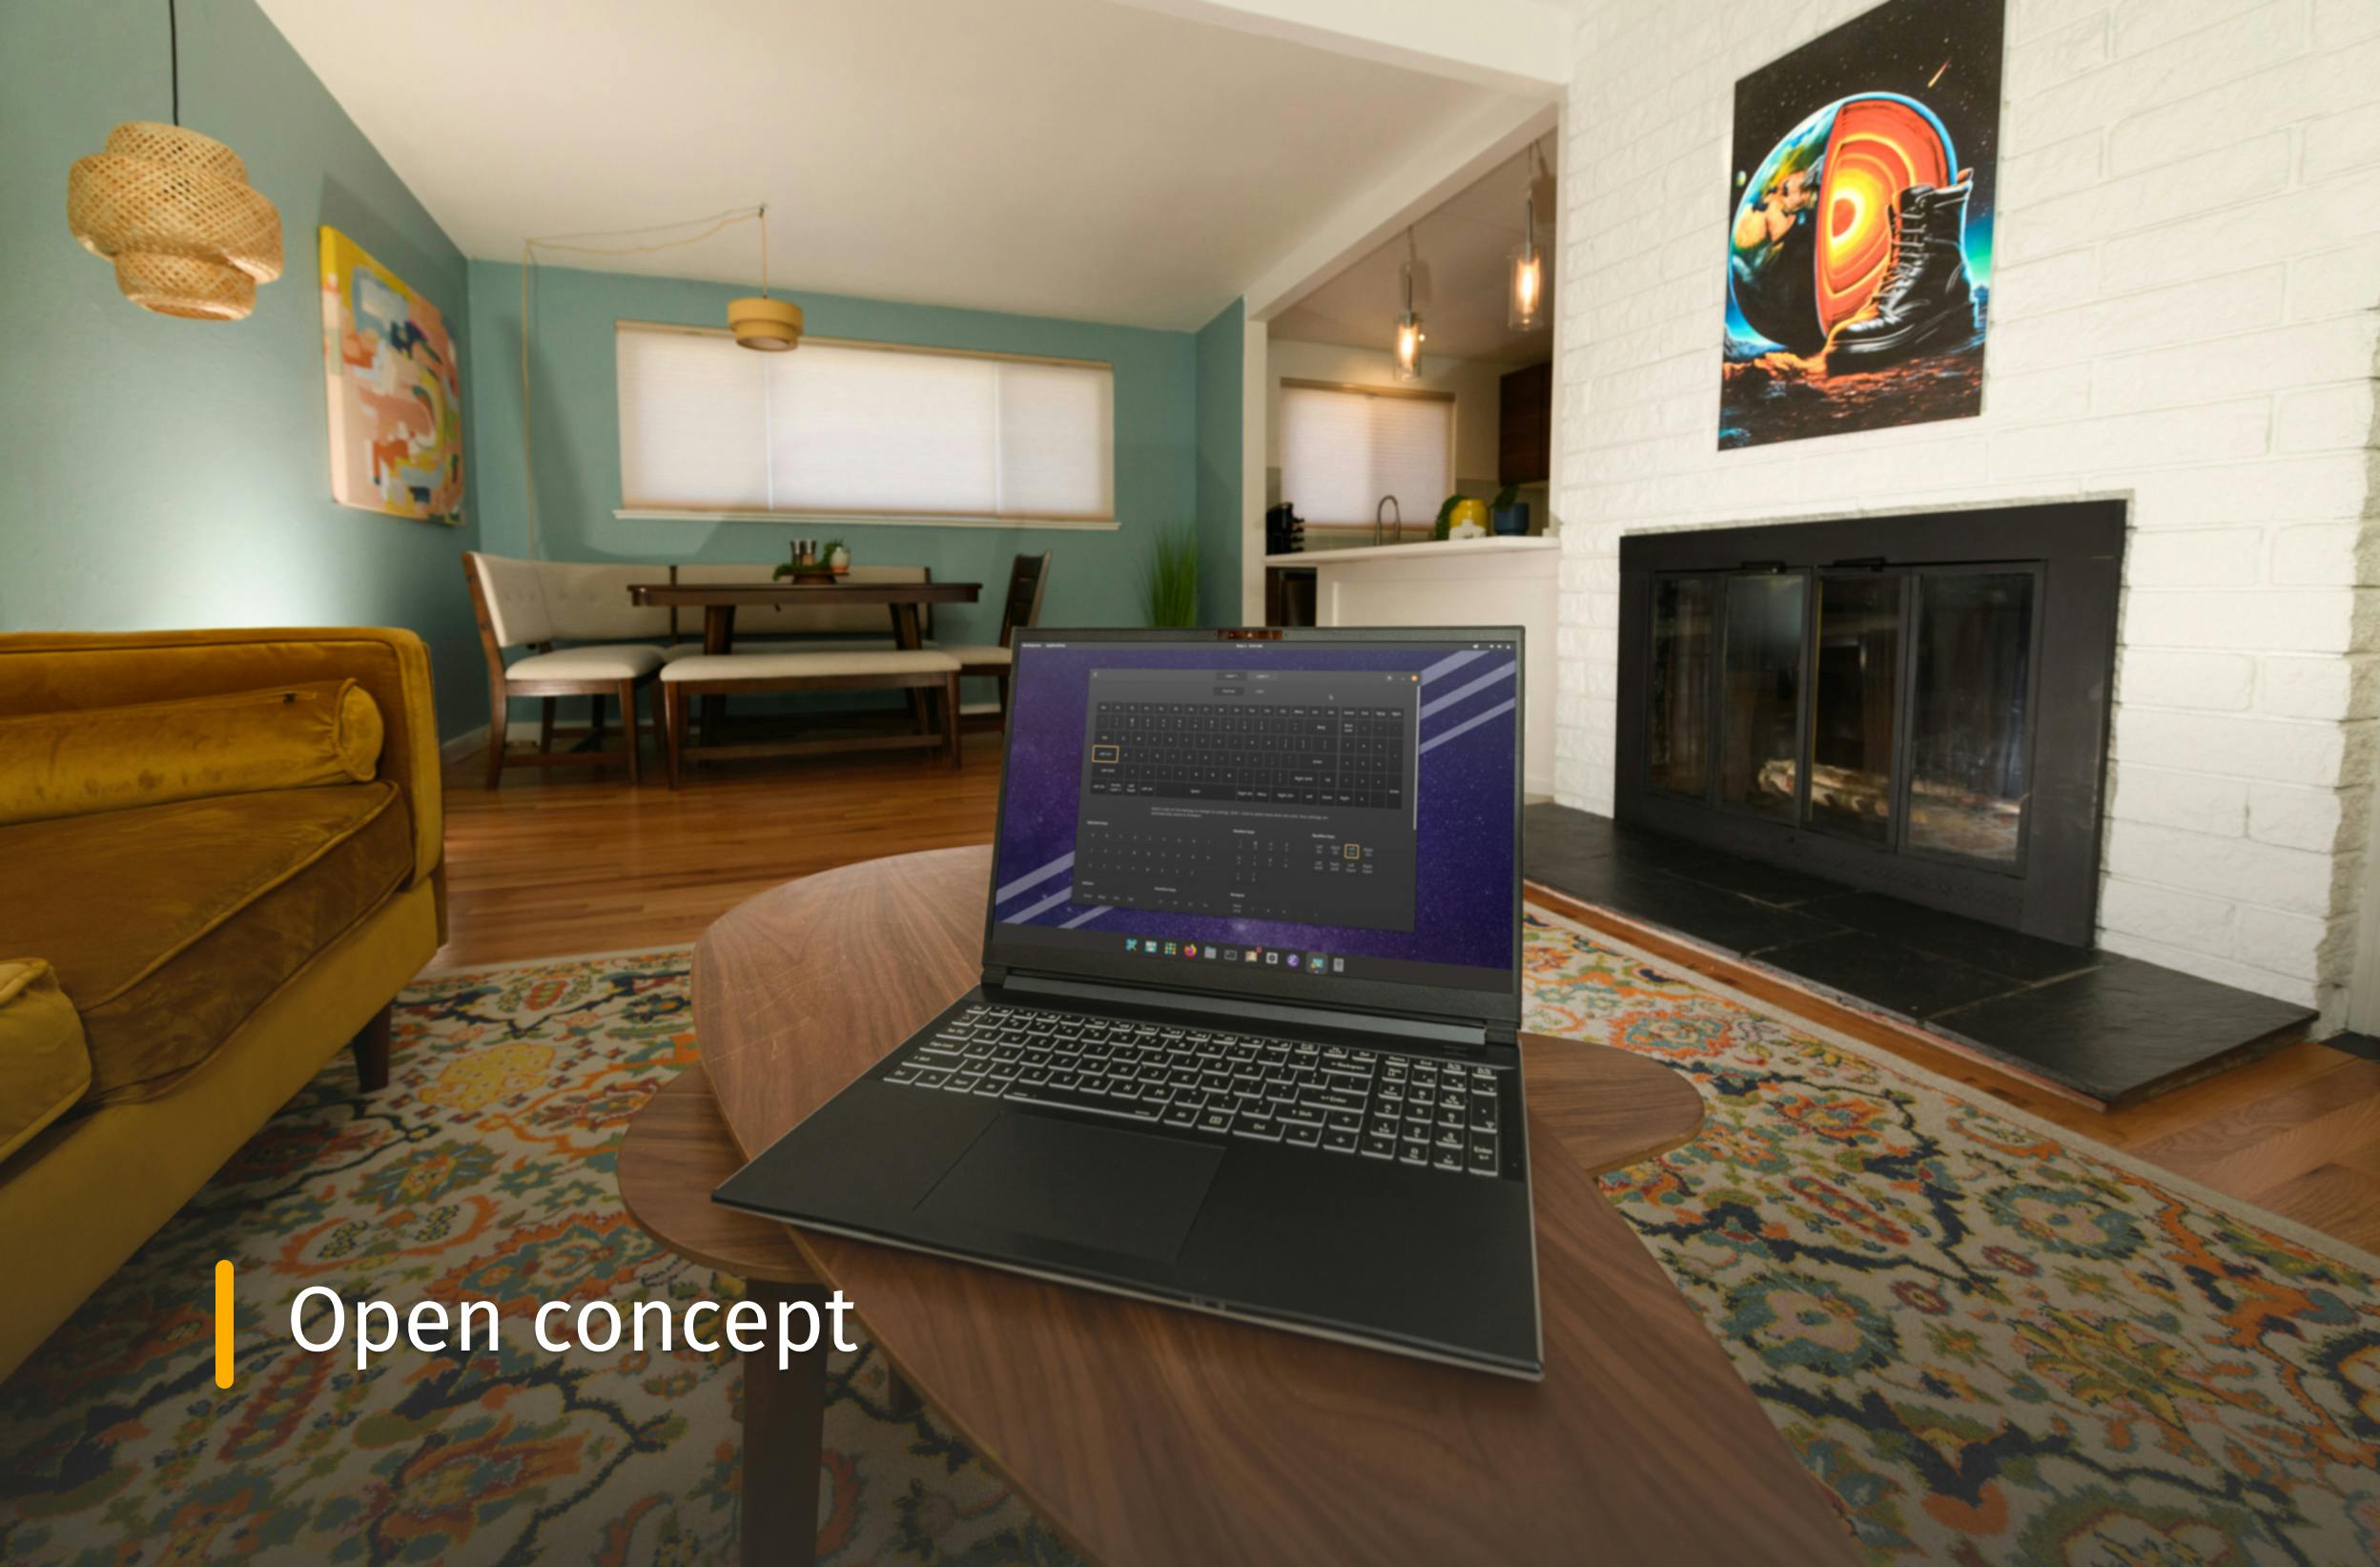 Darter Pro in an open concept living room with text that reads "Open concept"